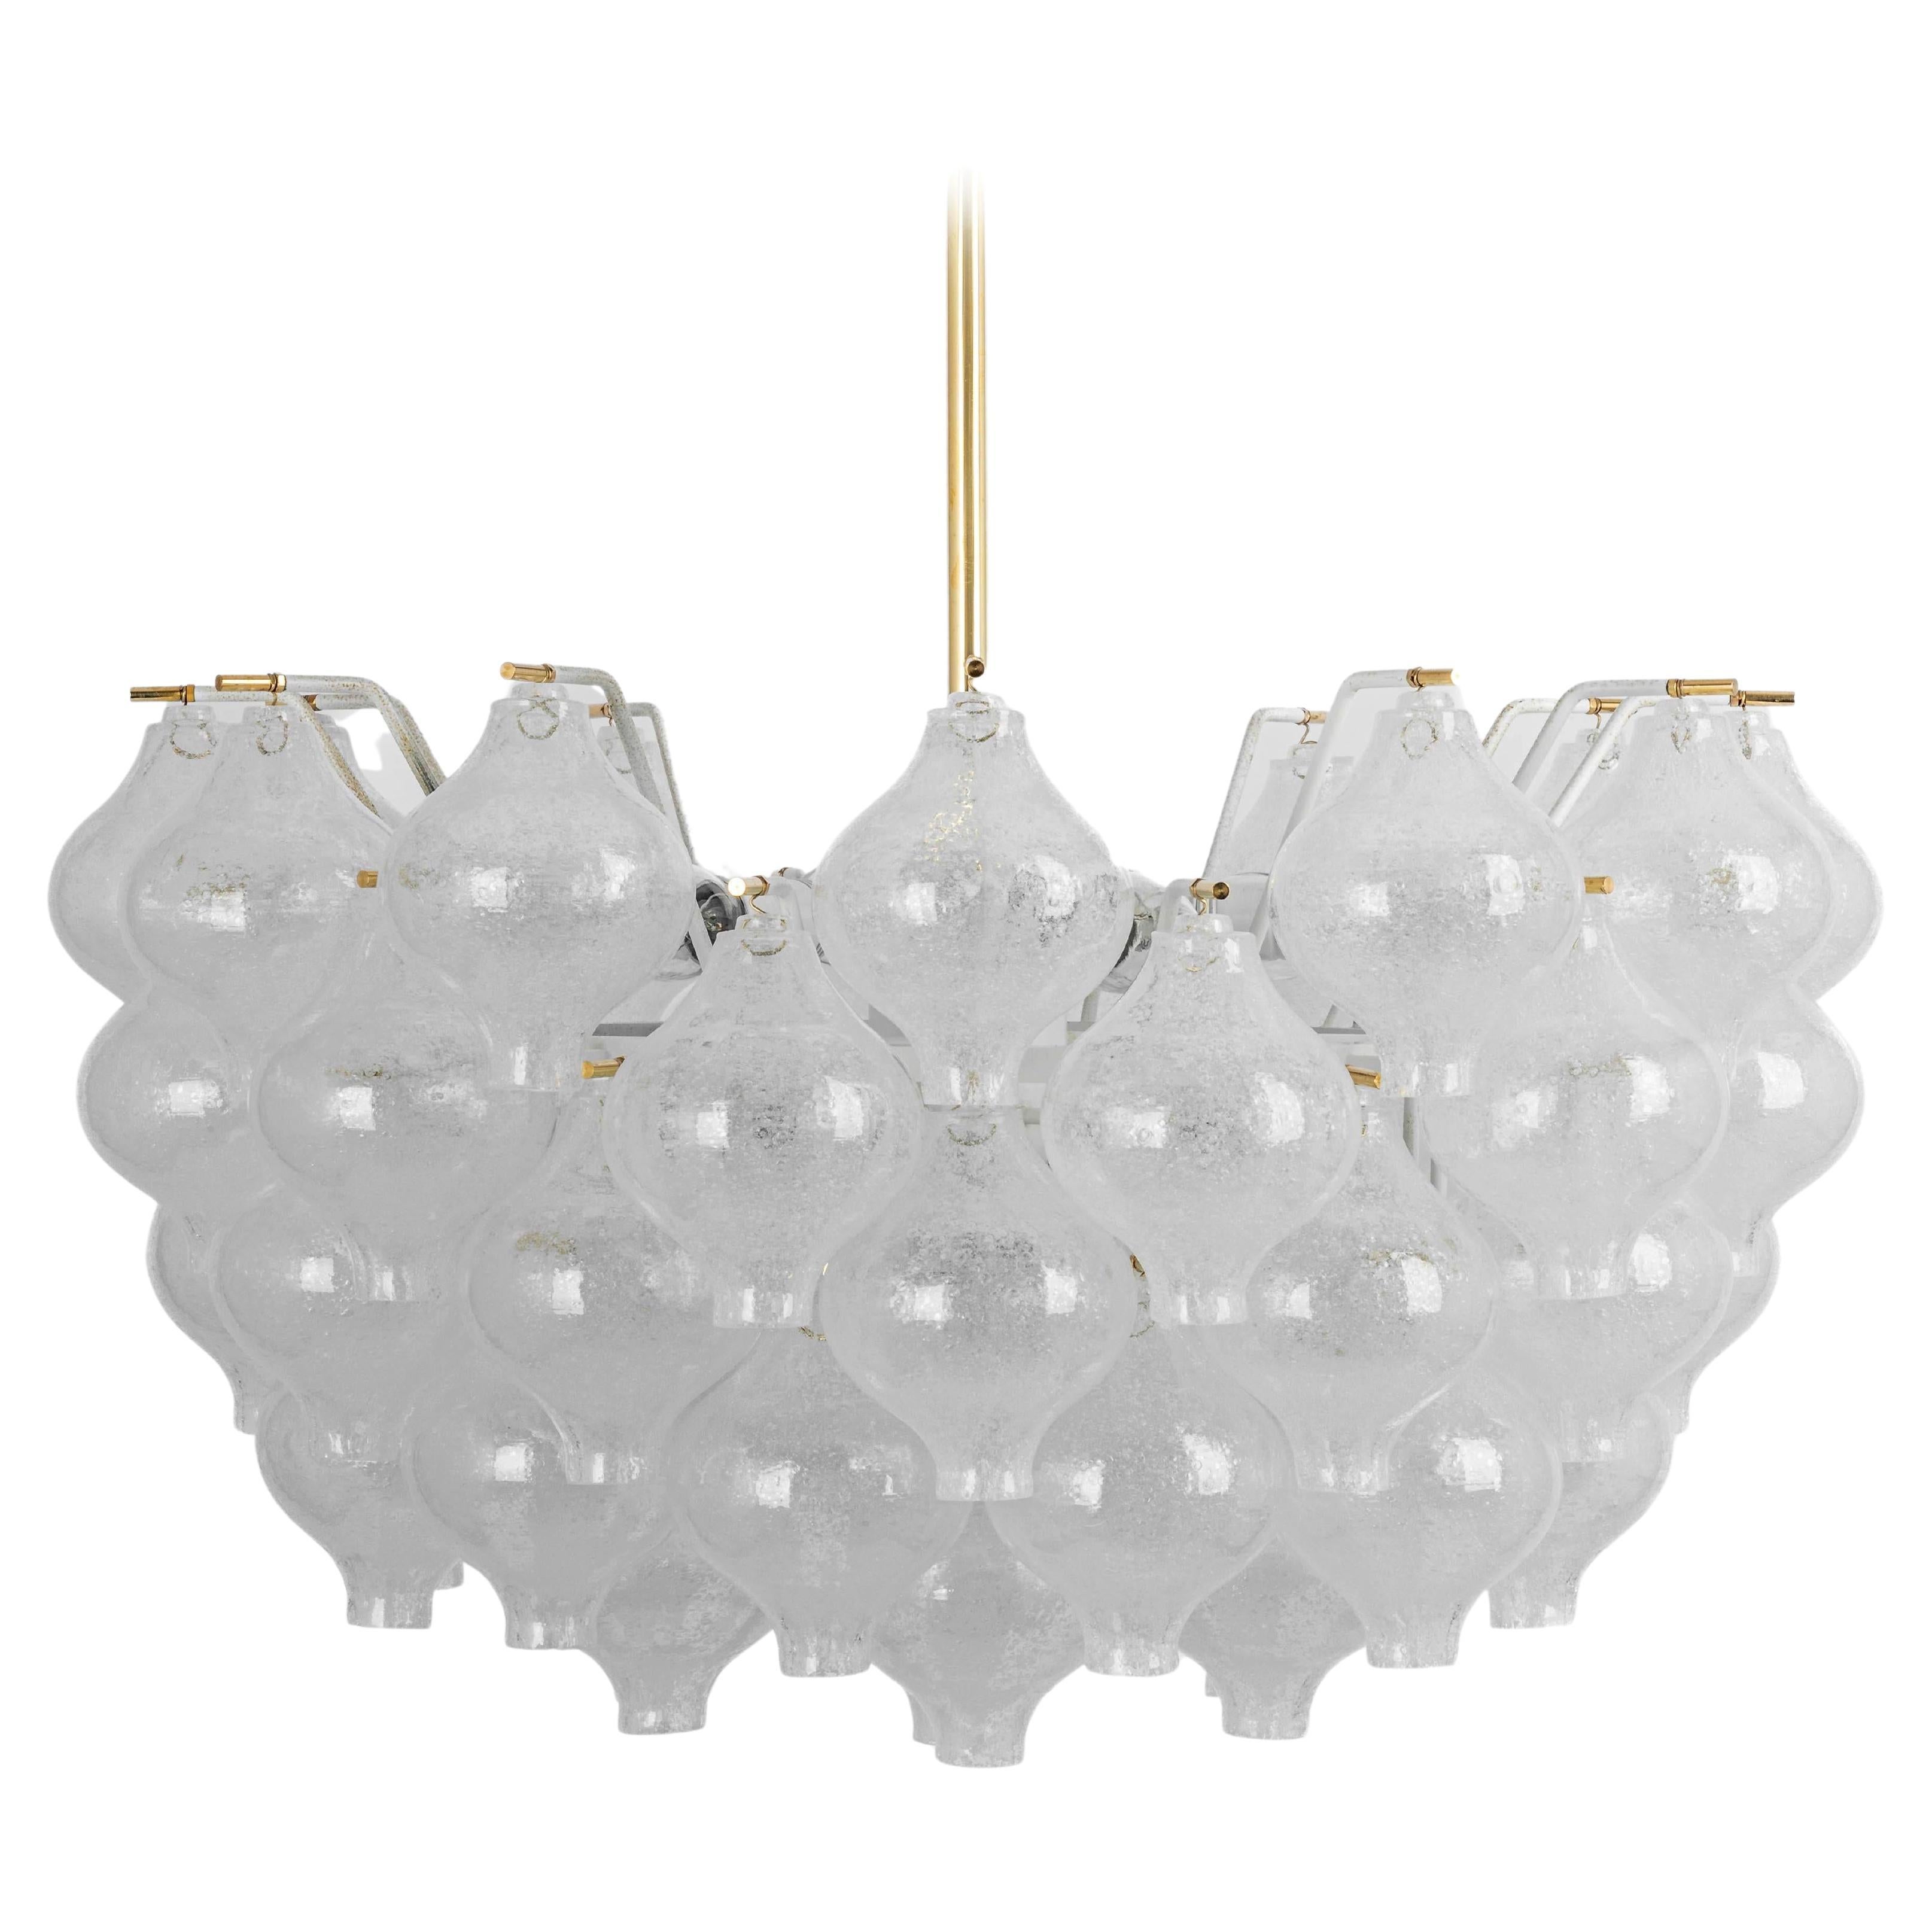 Austrian One of Two Large Kalmar 'Tulipan' Chandeliers Pendant Lights, Glass Brass, 1970 For Sale